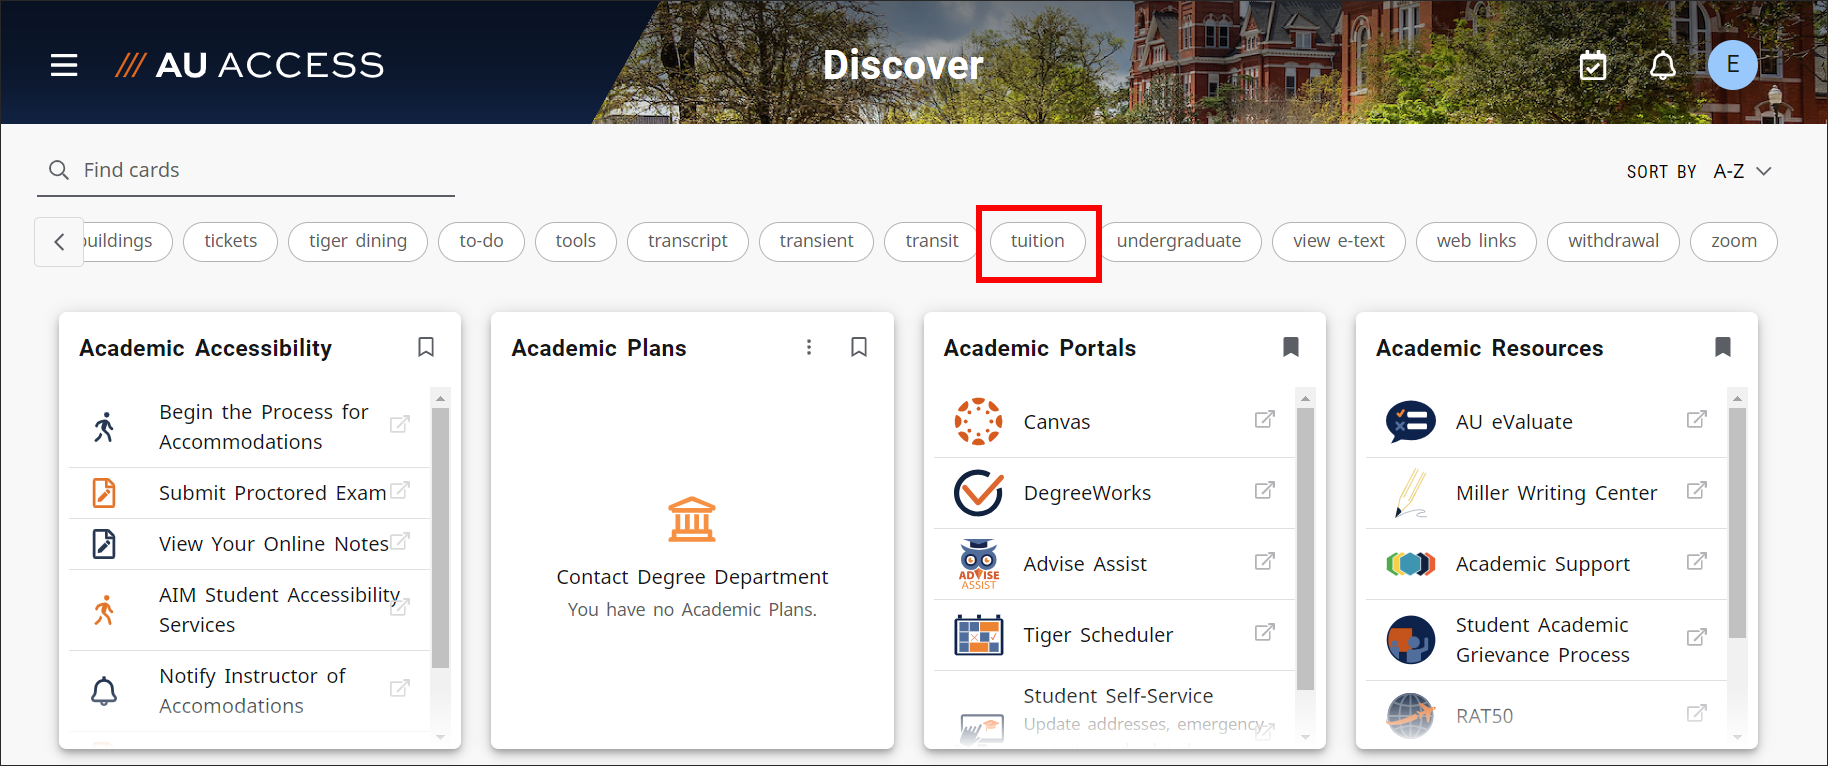 Discover keyword search